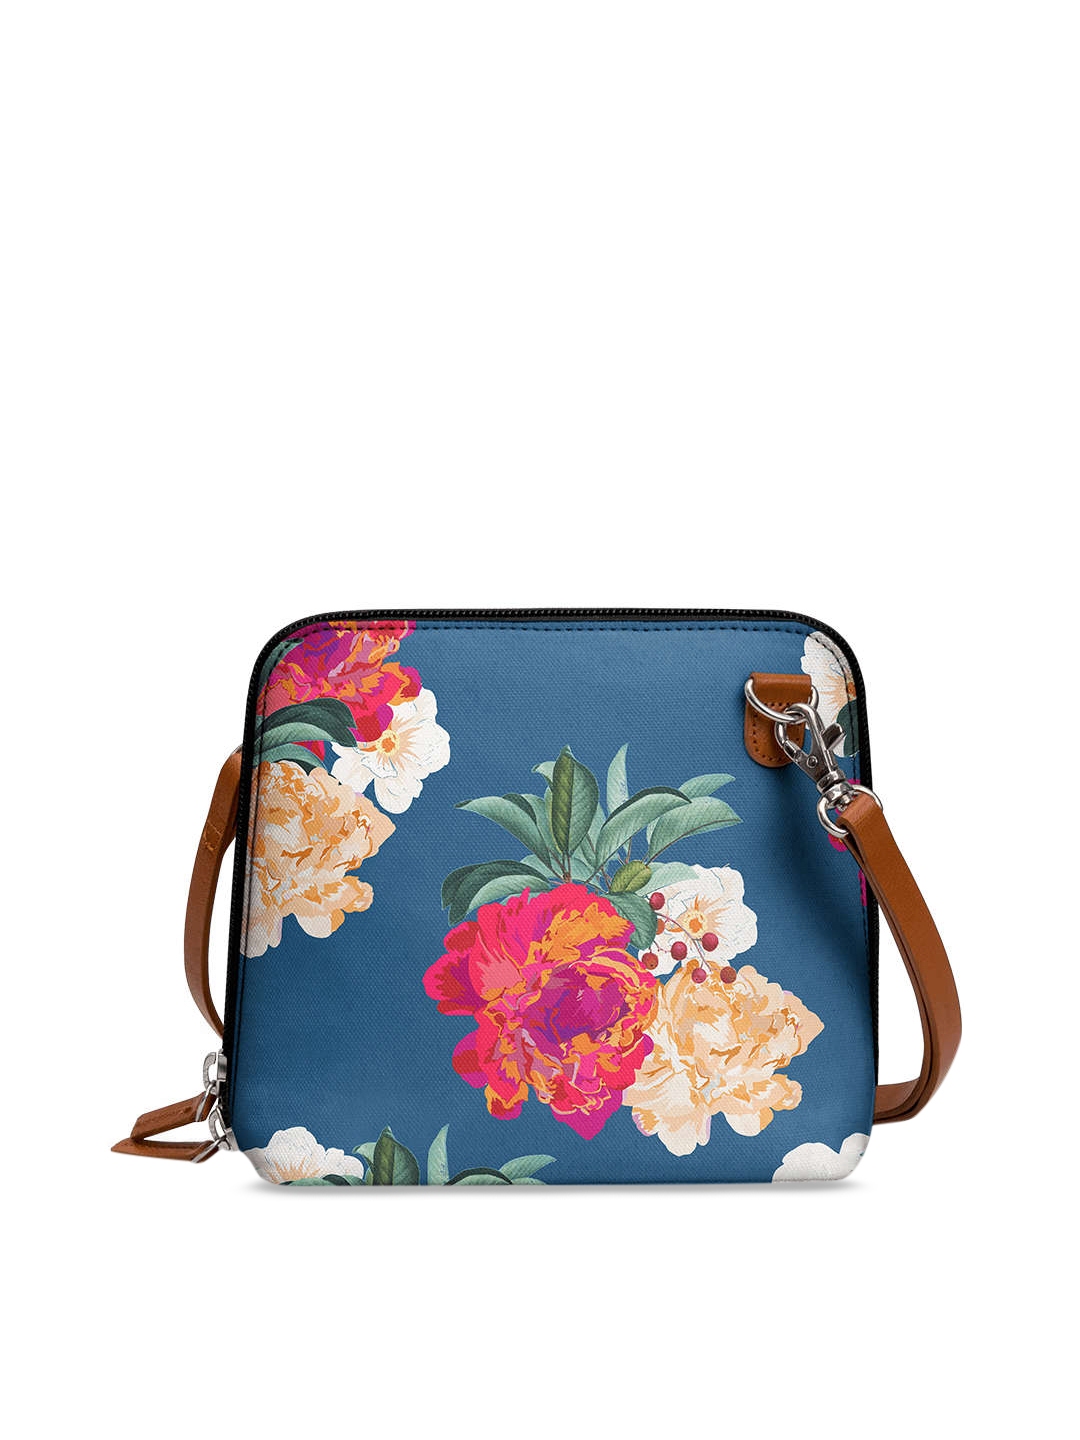 DailyObjects Messenger bags : Buy DailyObjects Recycled Pet Crossbody  Unisex Kelp Mantle Laptop Messenger Bag Online | Nykaa Fashion